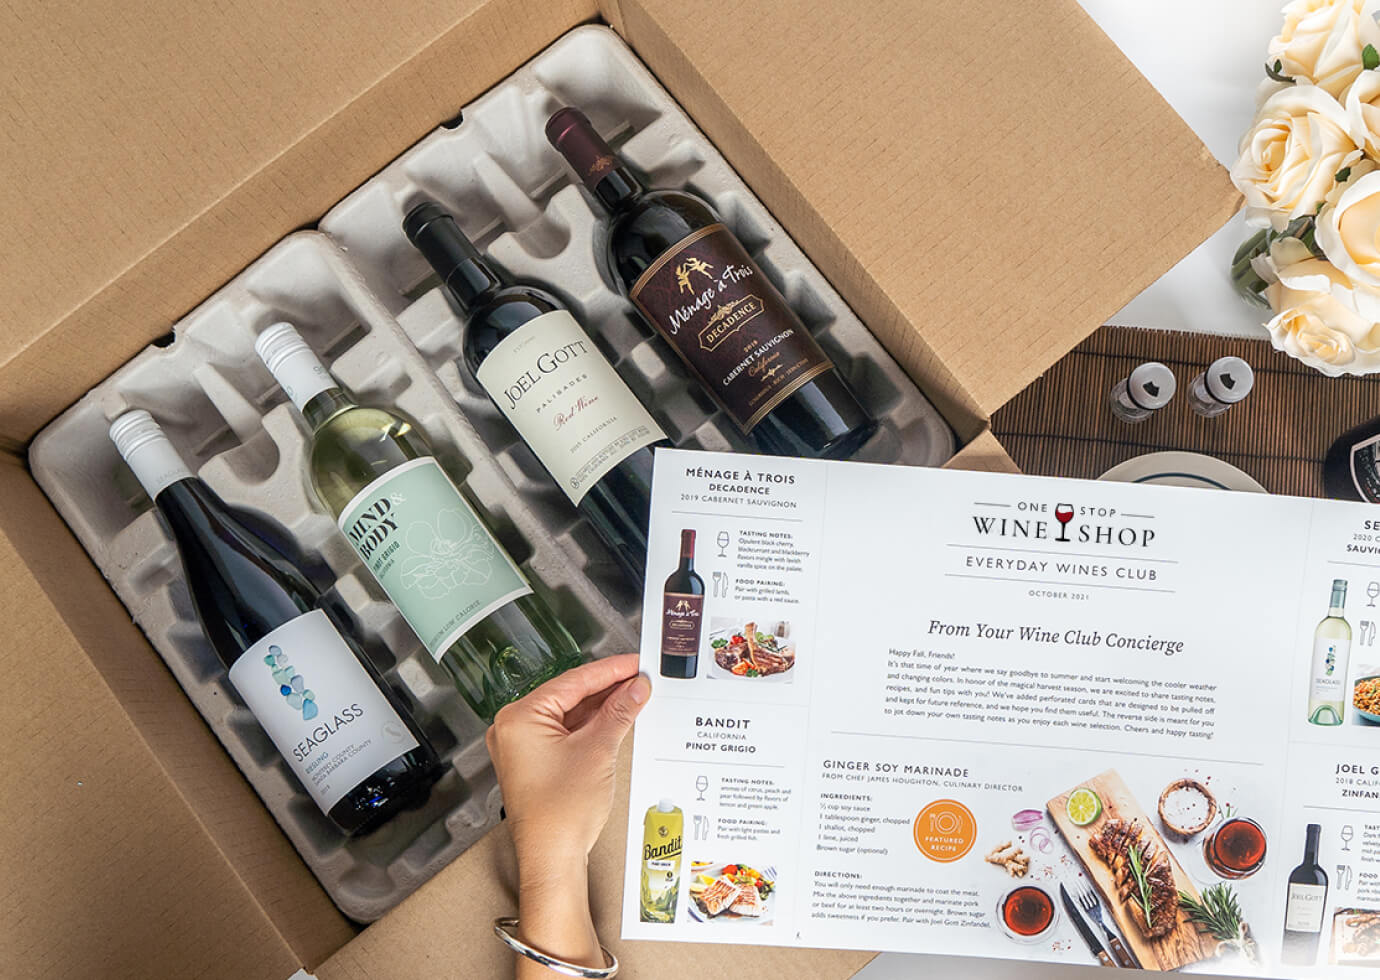 unboxing a wine club shipment